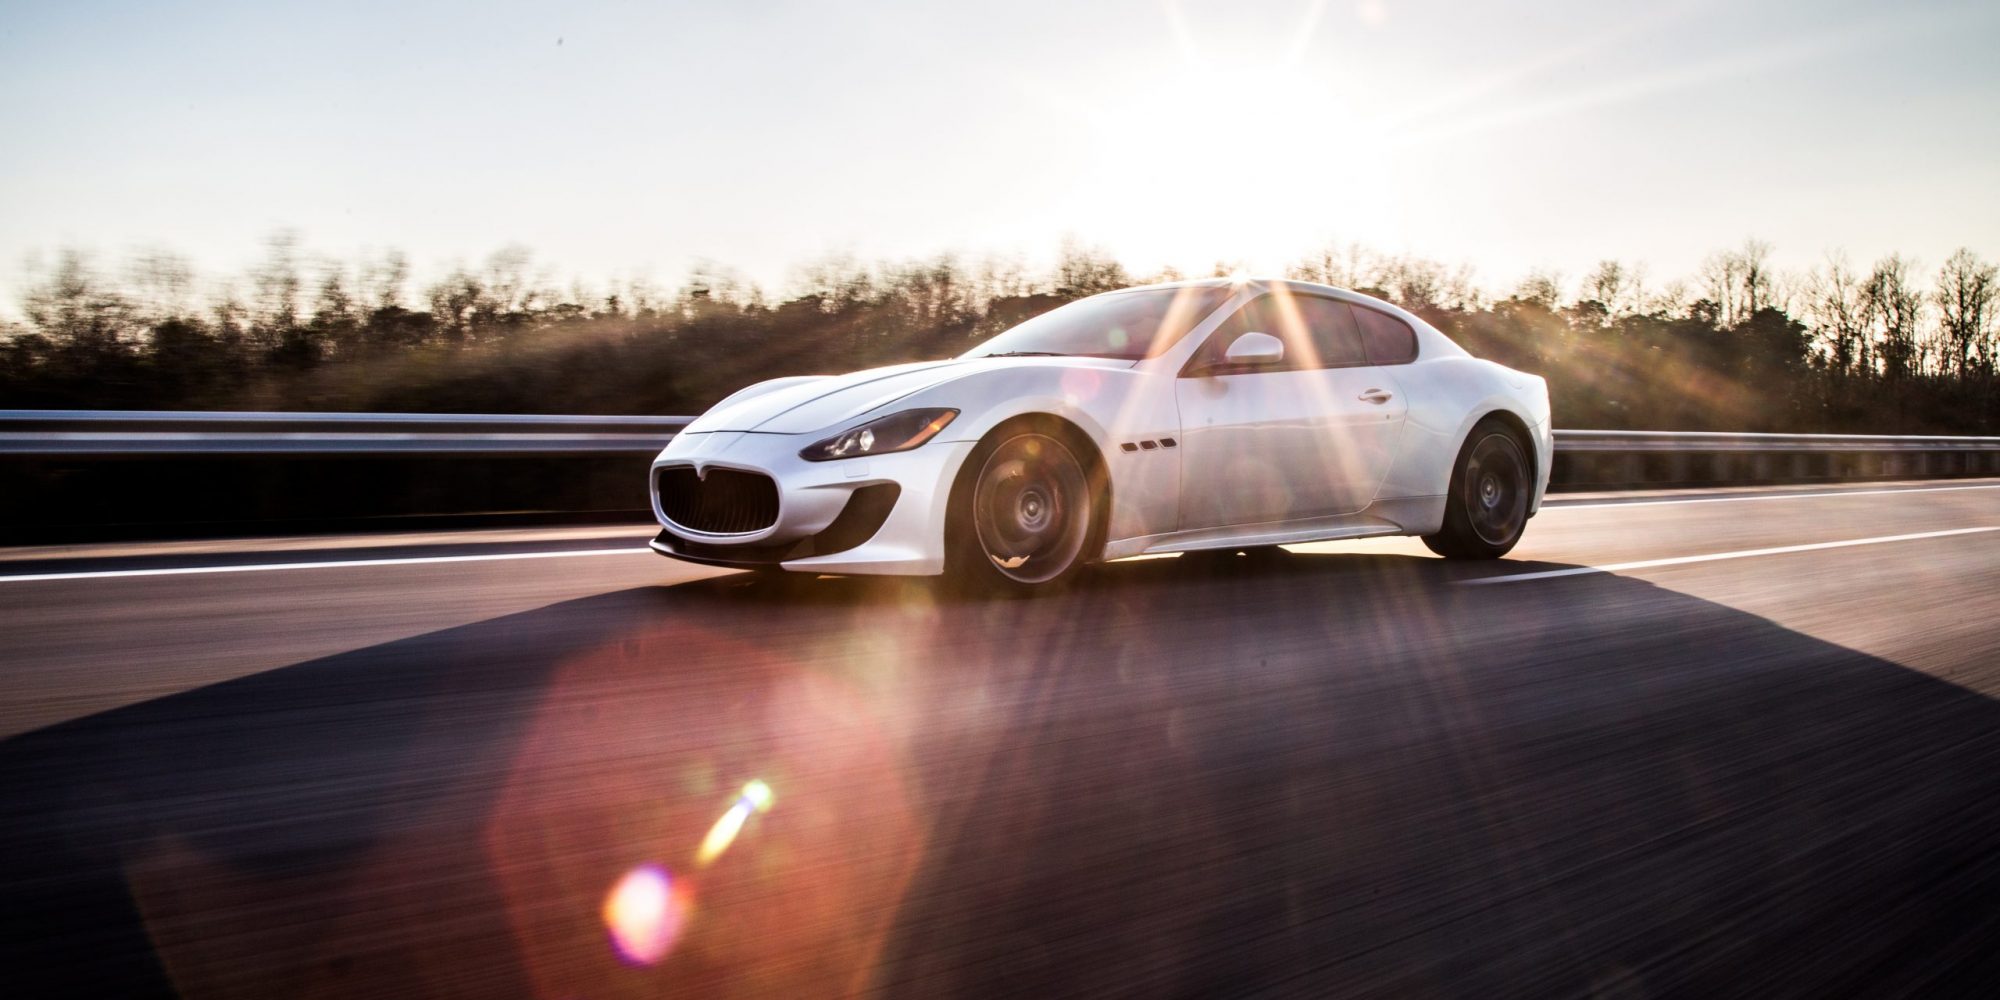 high-speed-silver-sport-car-driving-highway-sunny-weather